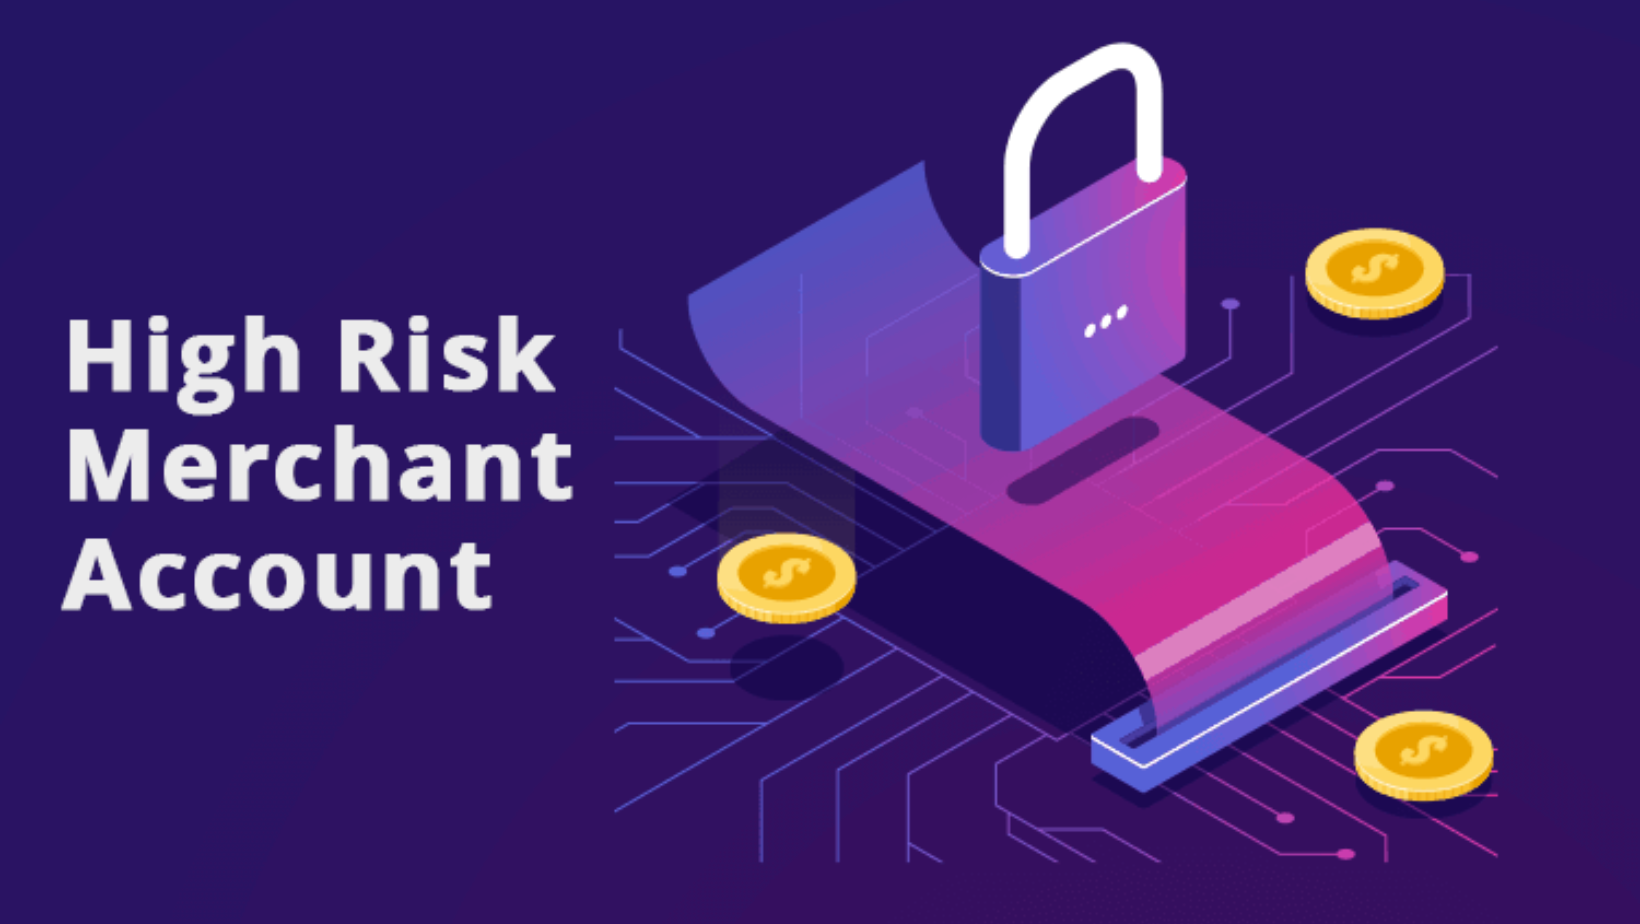 What Are The Steps For Getting A High Risk Merchant Account?